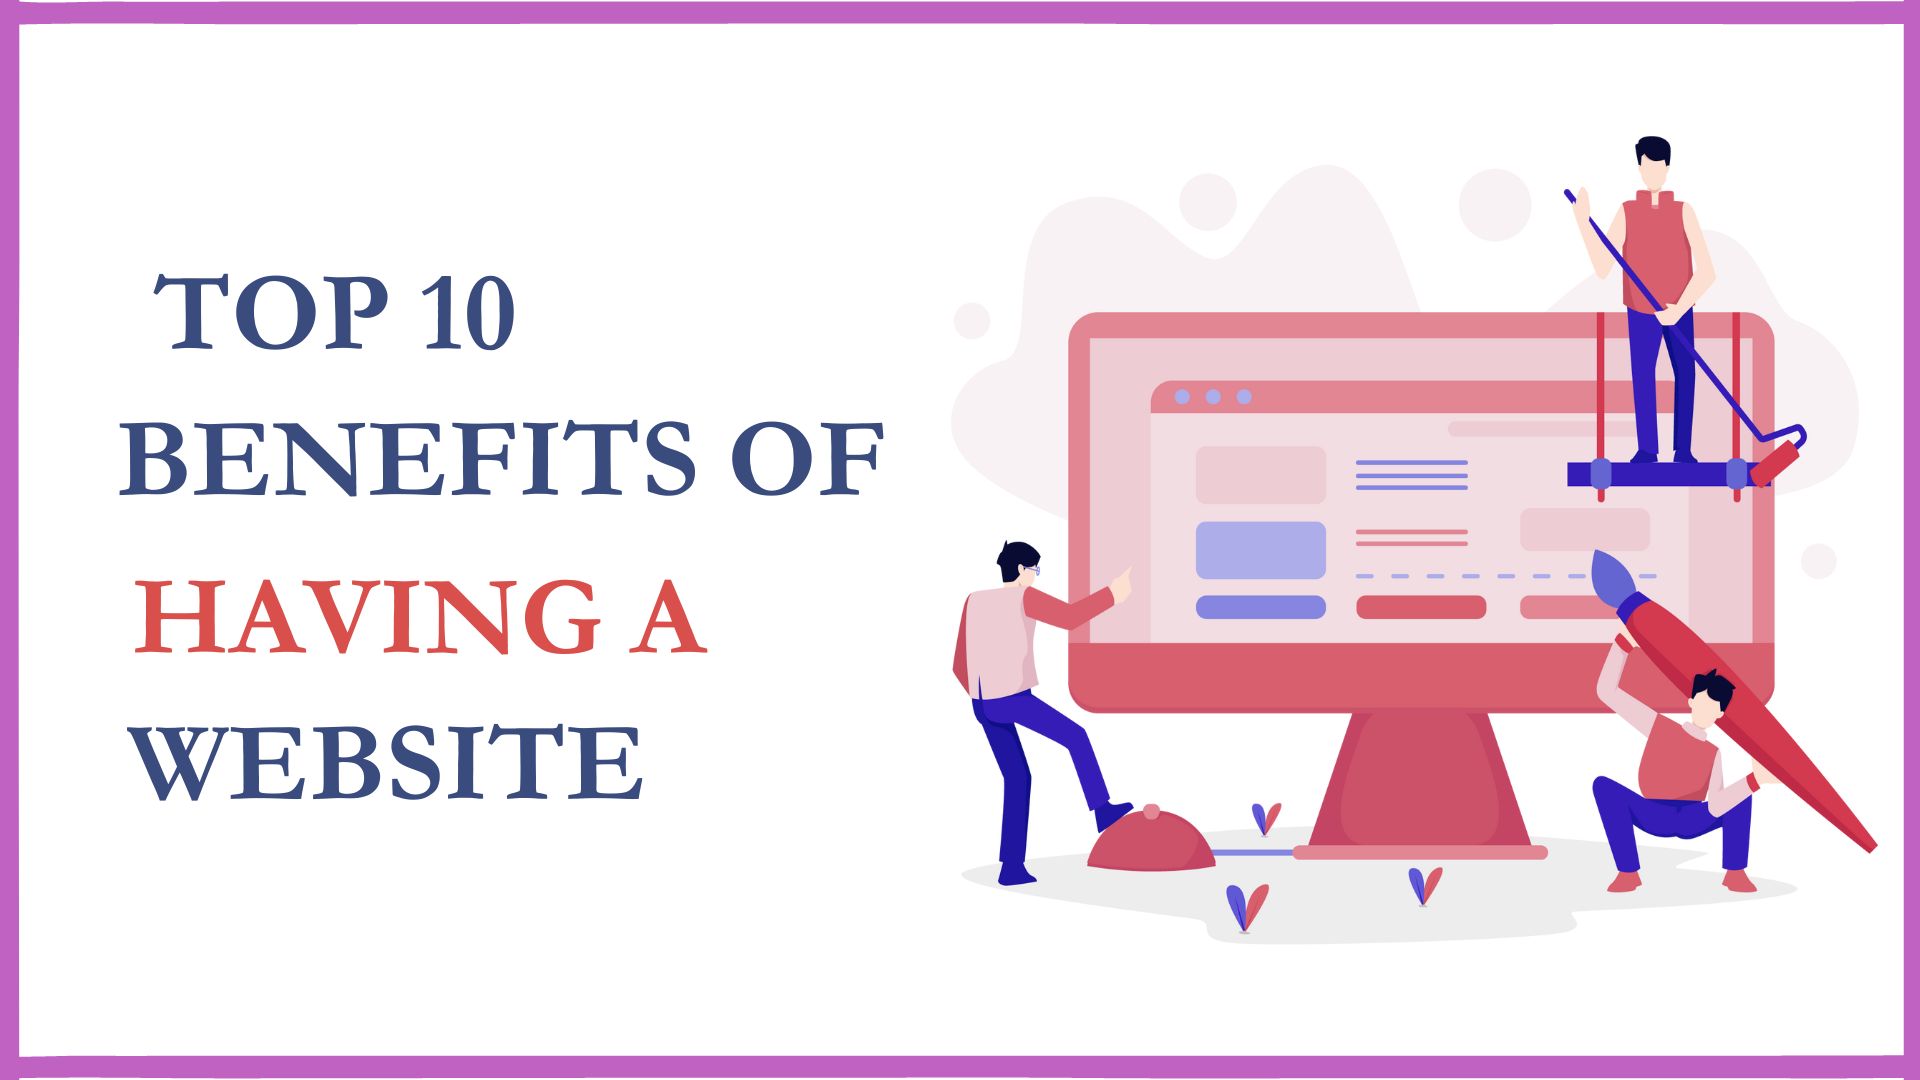 Top 10 benefits of a website for small business